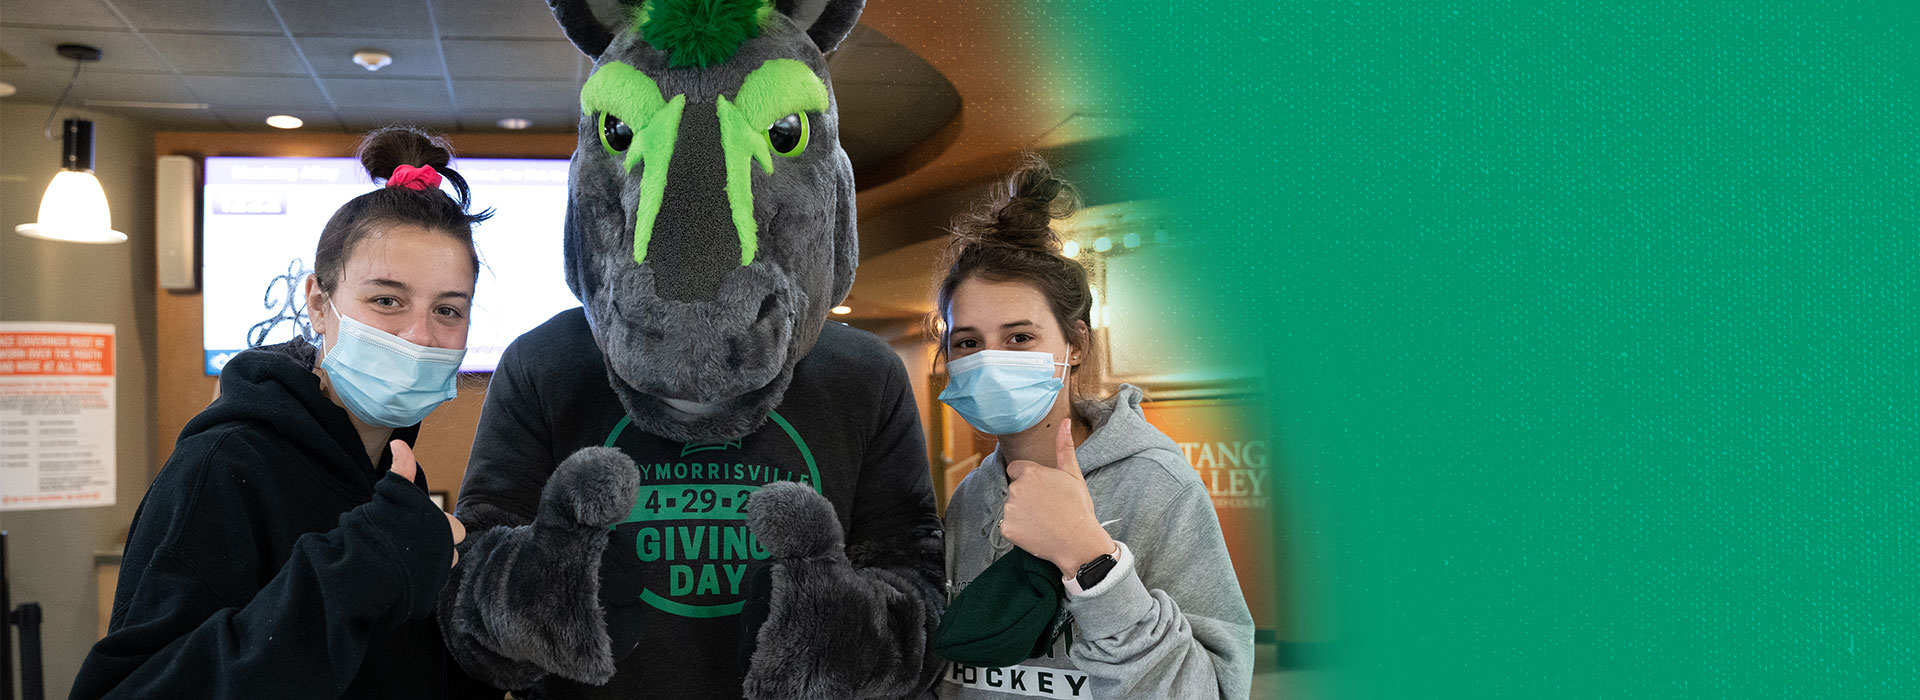 Mo poses with two SUNY Morrisville students on Giving Day